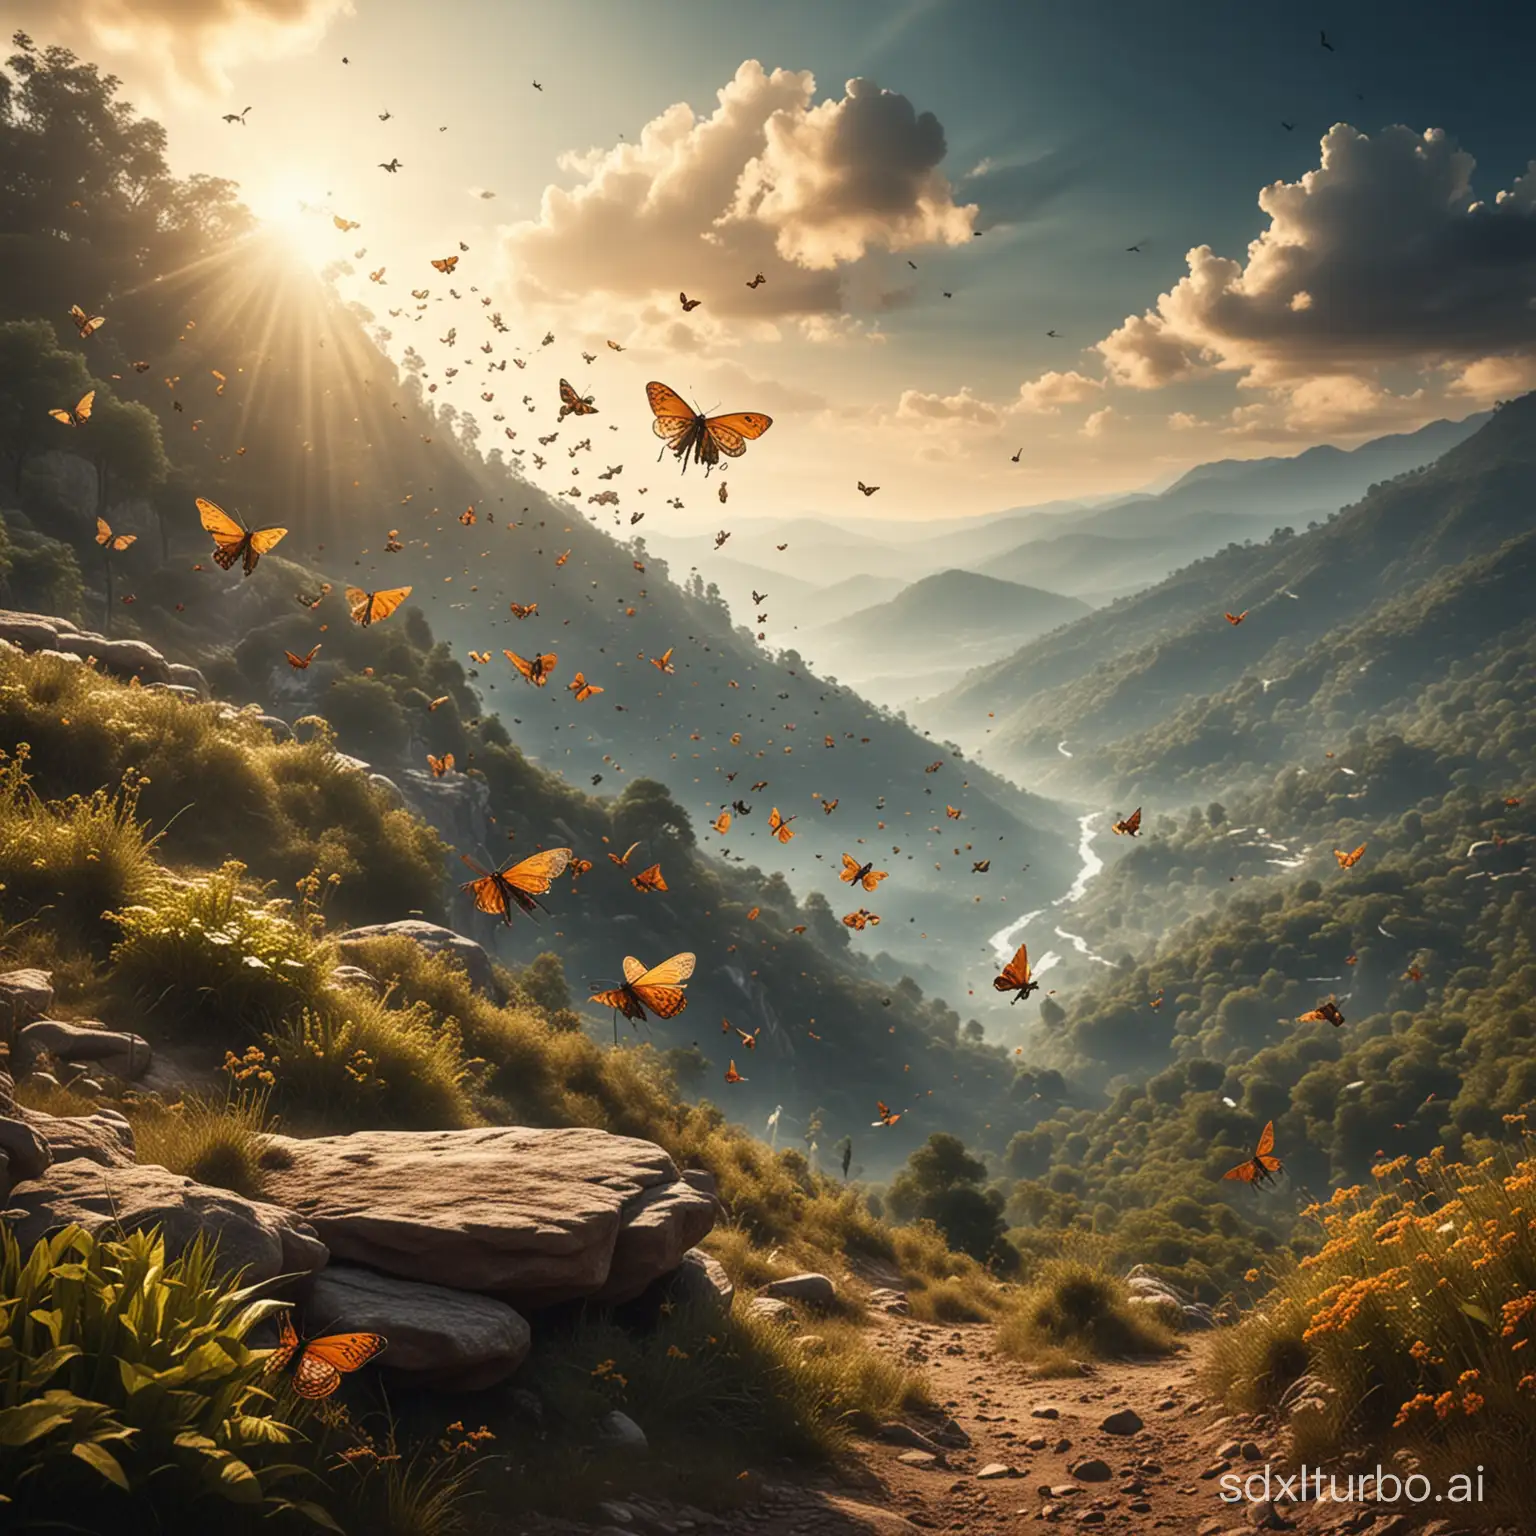 Enchanting-Fantasy-Swarm-of-Ethereal-Insects-Soaring-Above-a-Majestic-Hill-Station